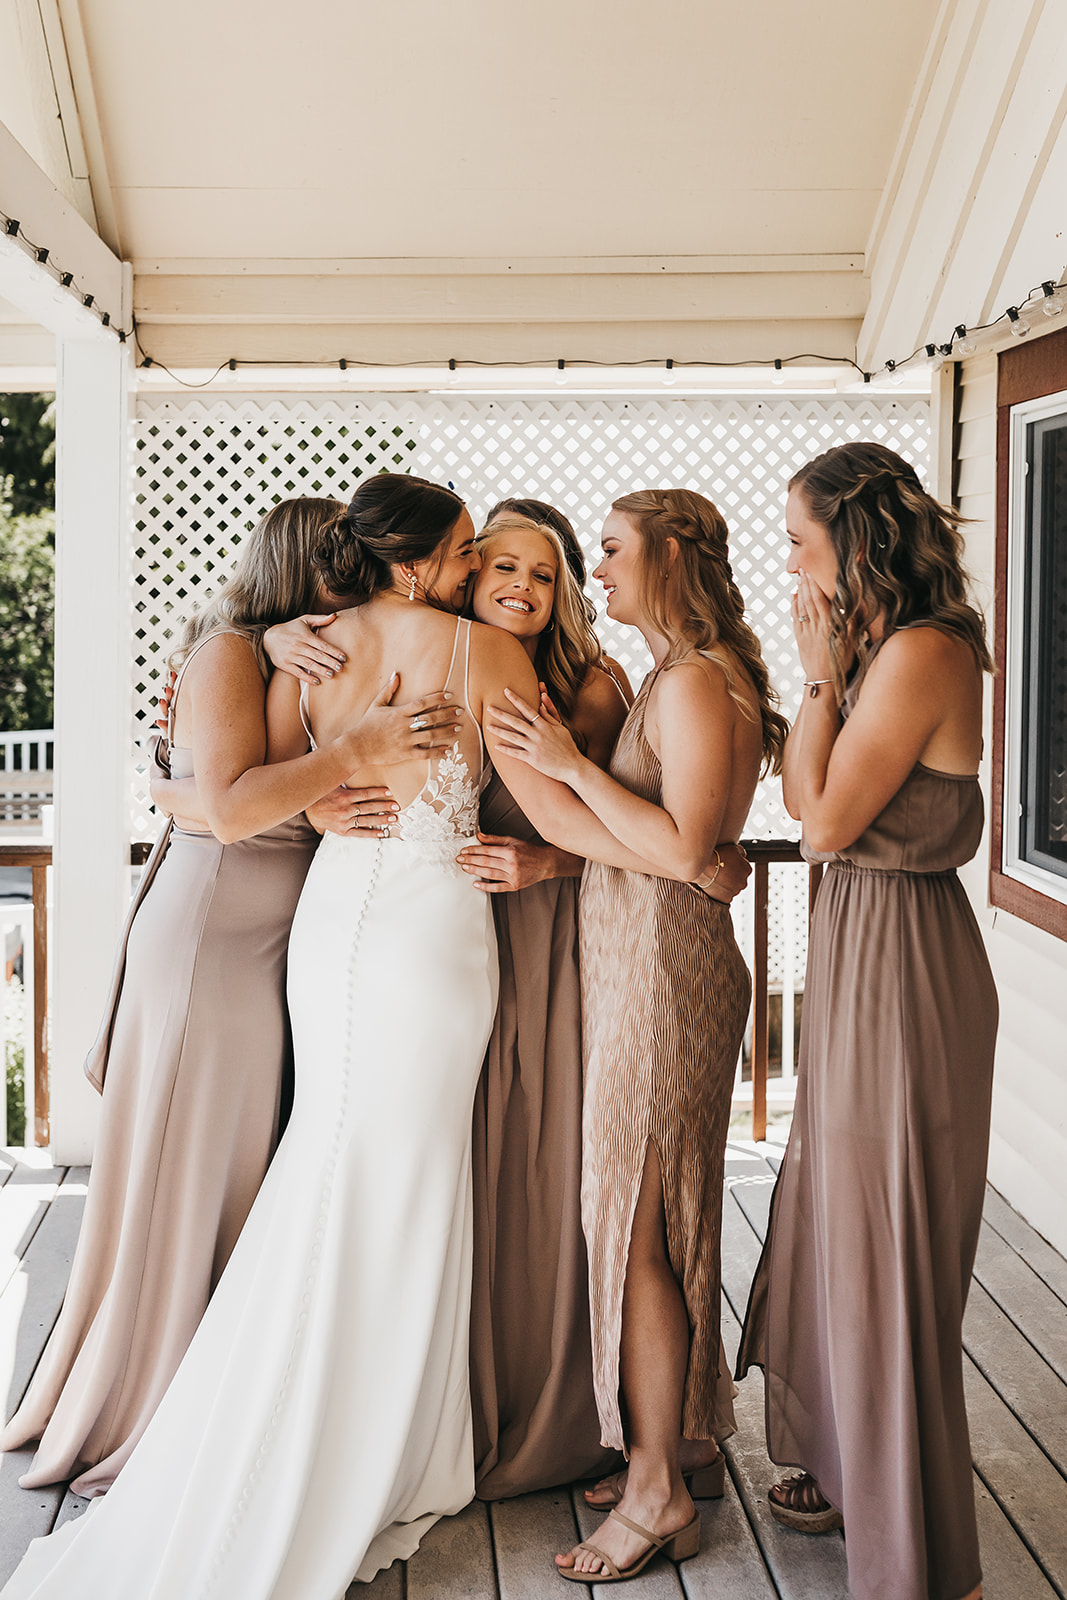 Bridesmaids embrace the bride at first look of bride at private lake house wedding.